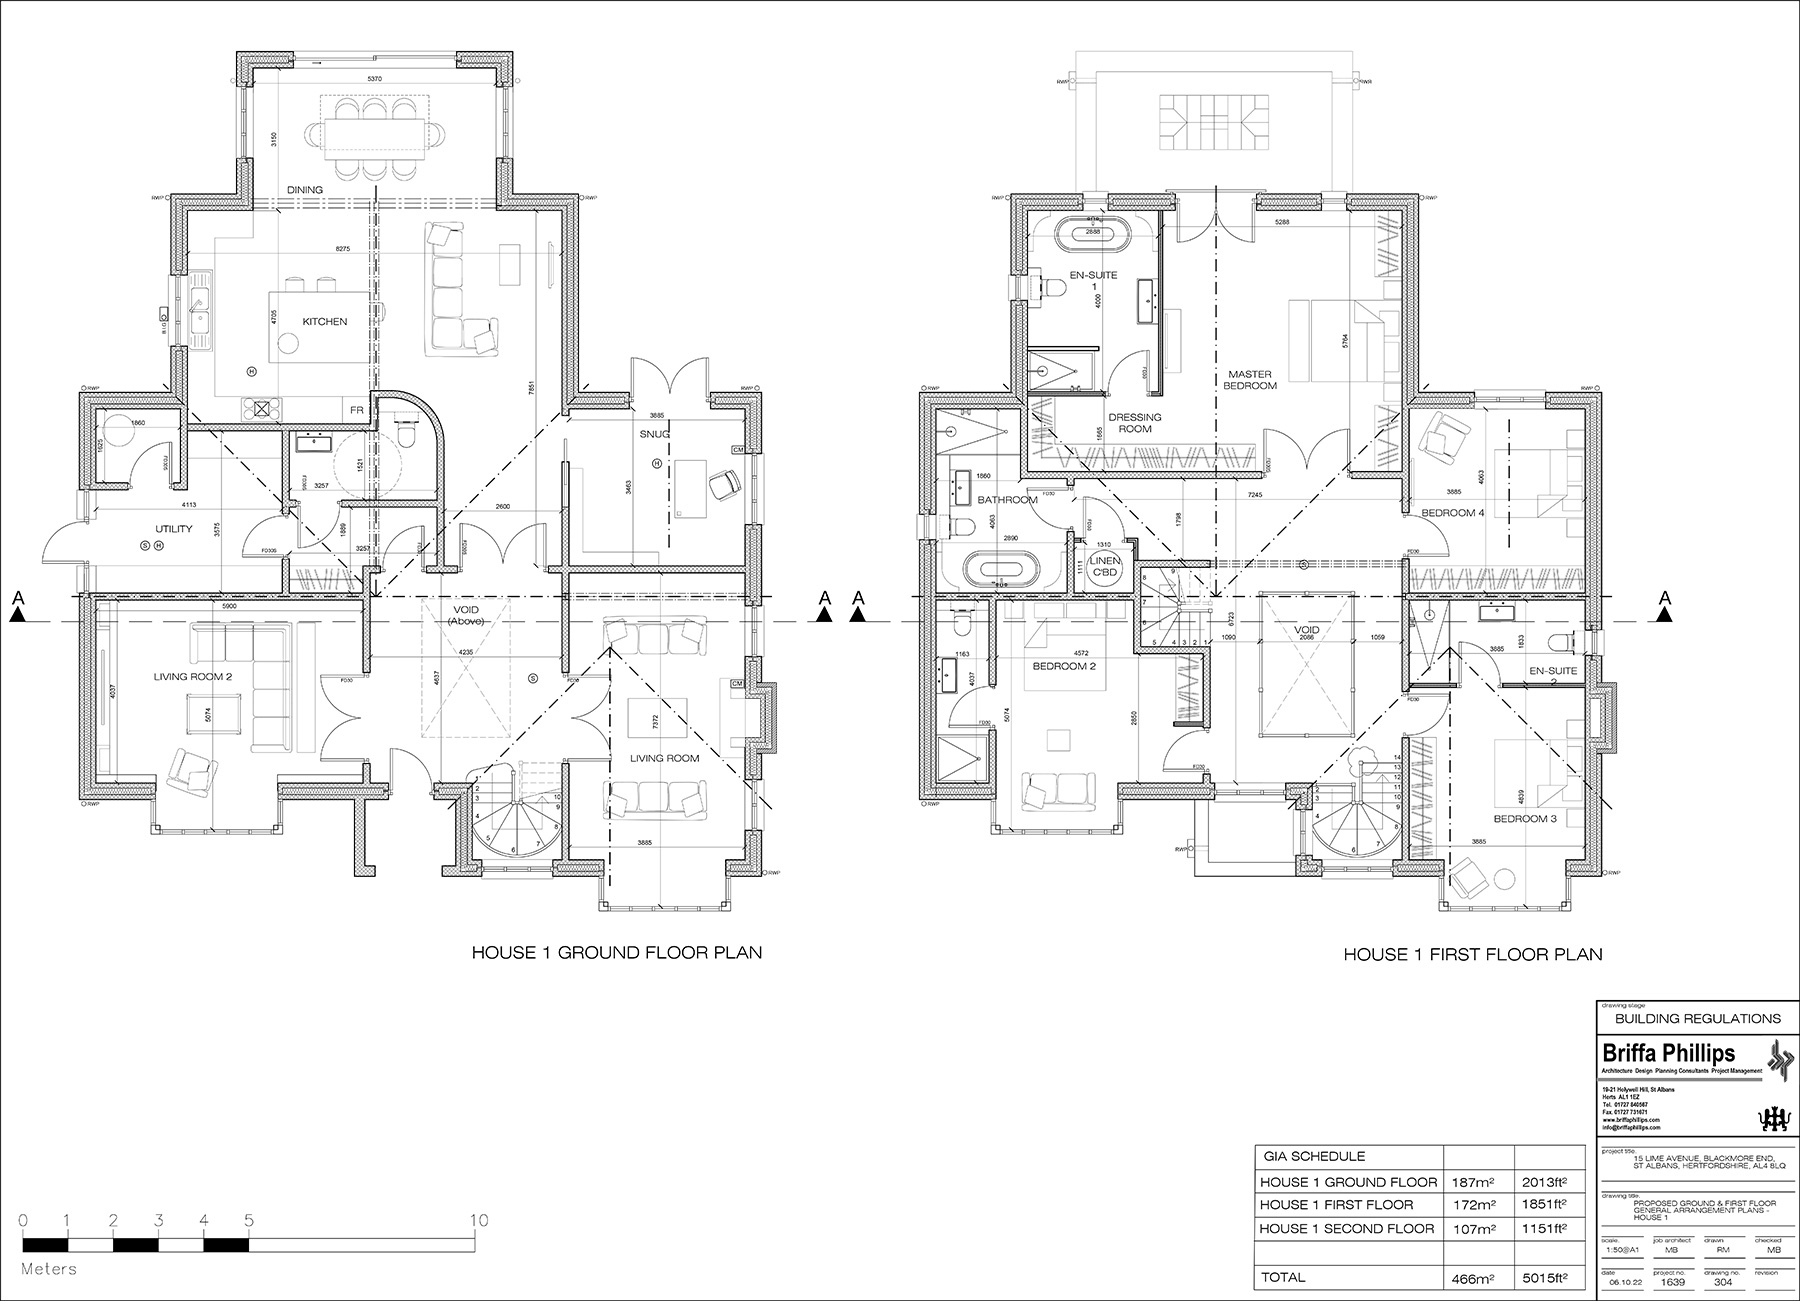 ground floor plans of house 1